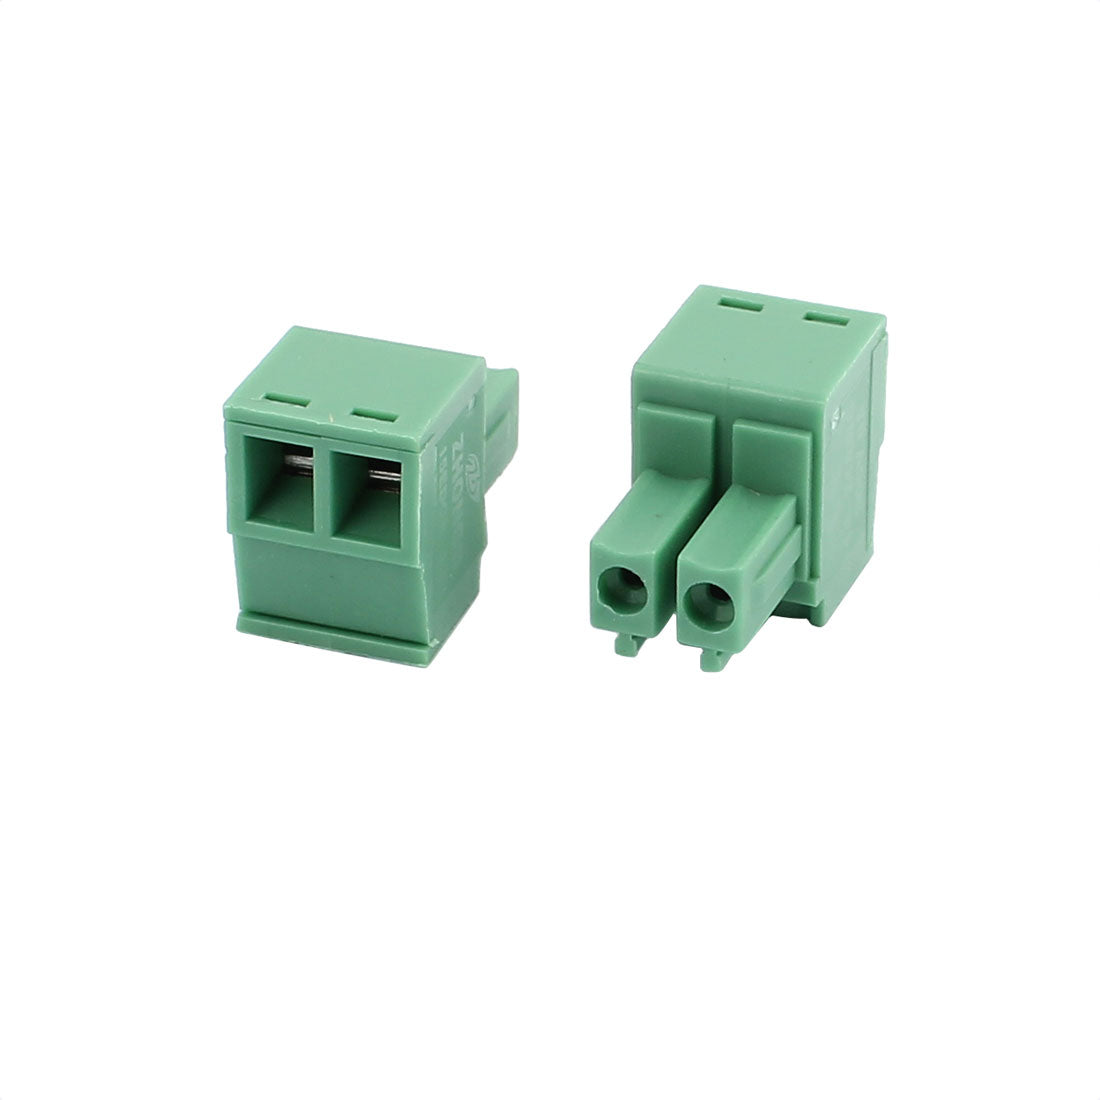 uxcell Uxcell 20Pcs 300V 2EDGK 3.81mm Pitch 2-Pin PCB Screw Terminal Block Connector